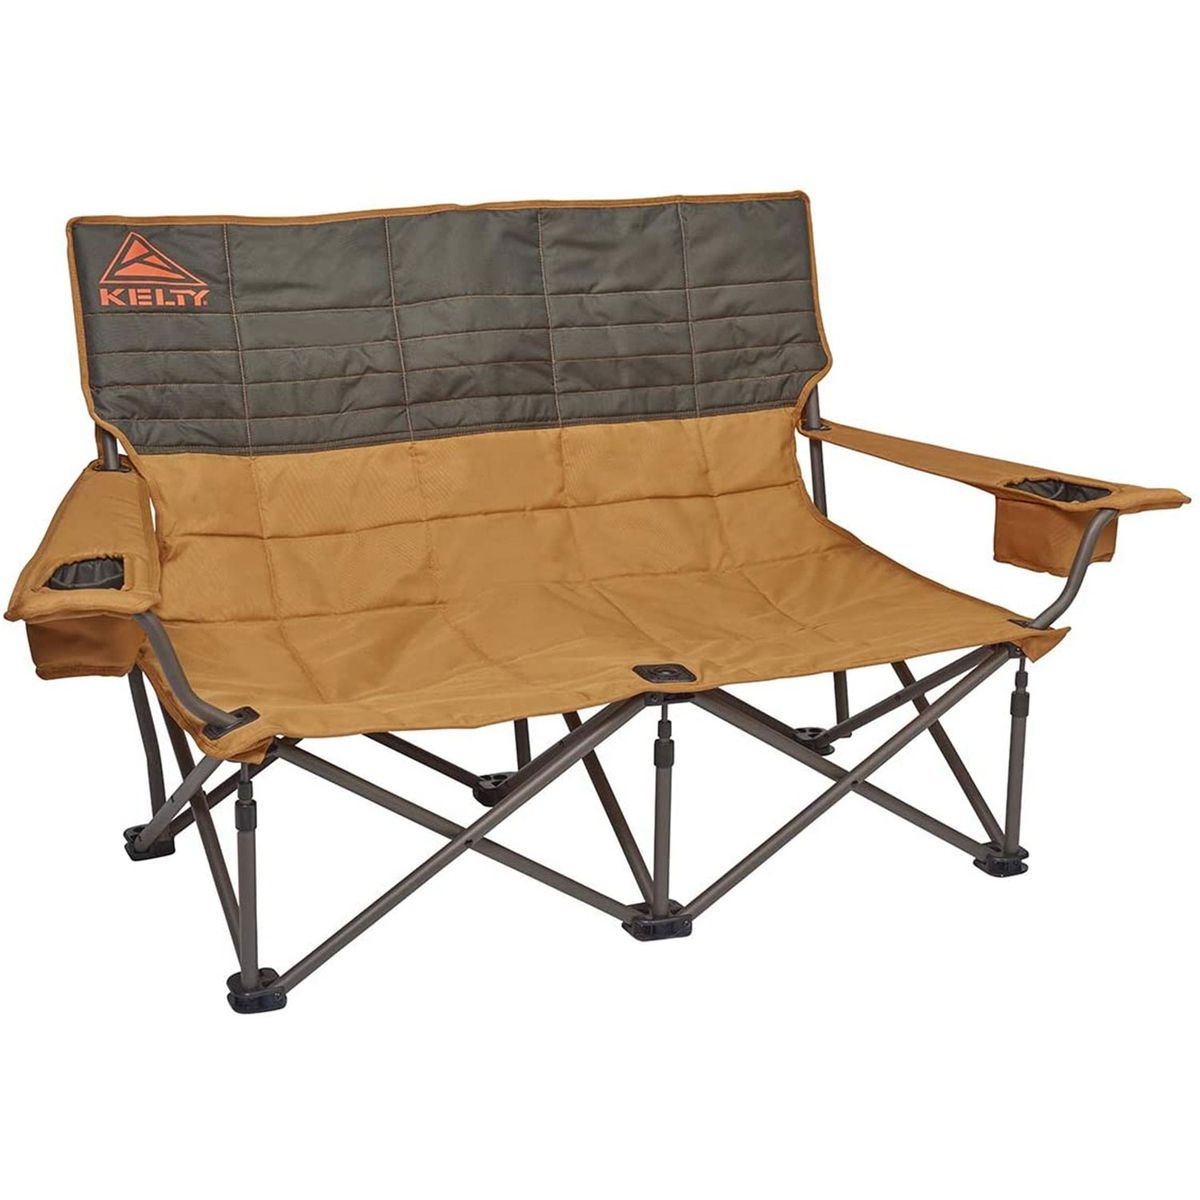 Best for Getting Cozy: Kelty Low-Loveseat Camping Chair